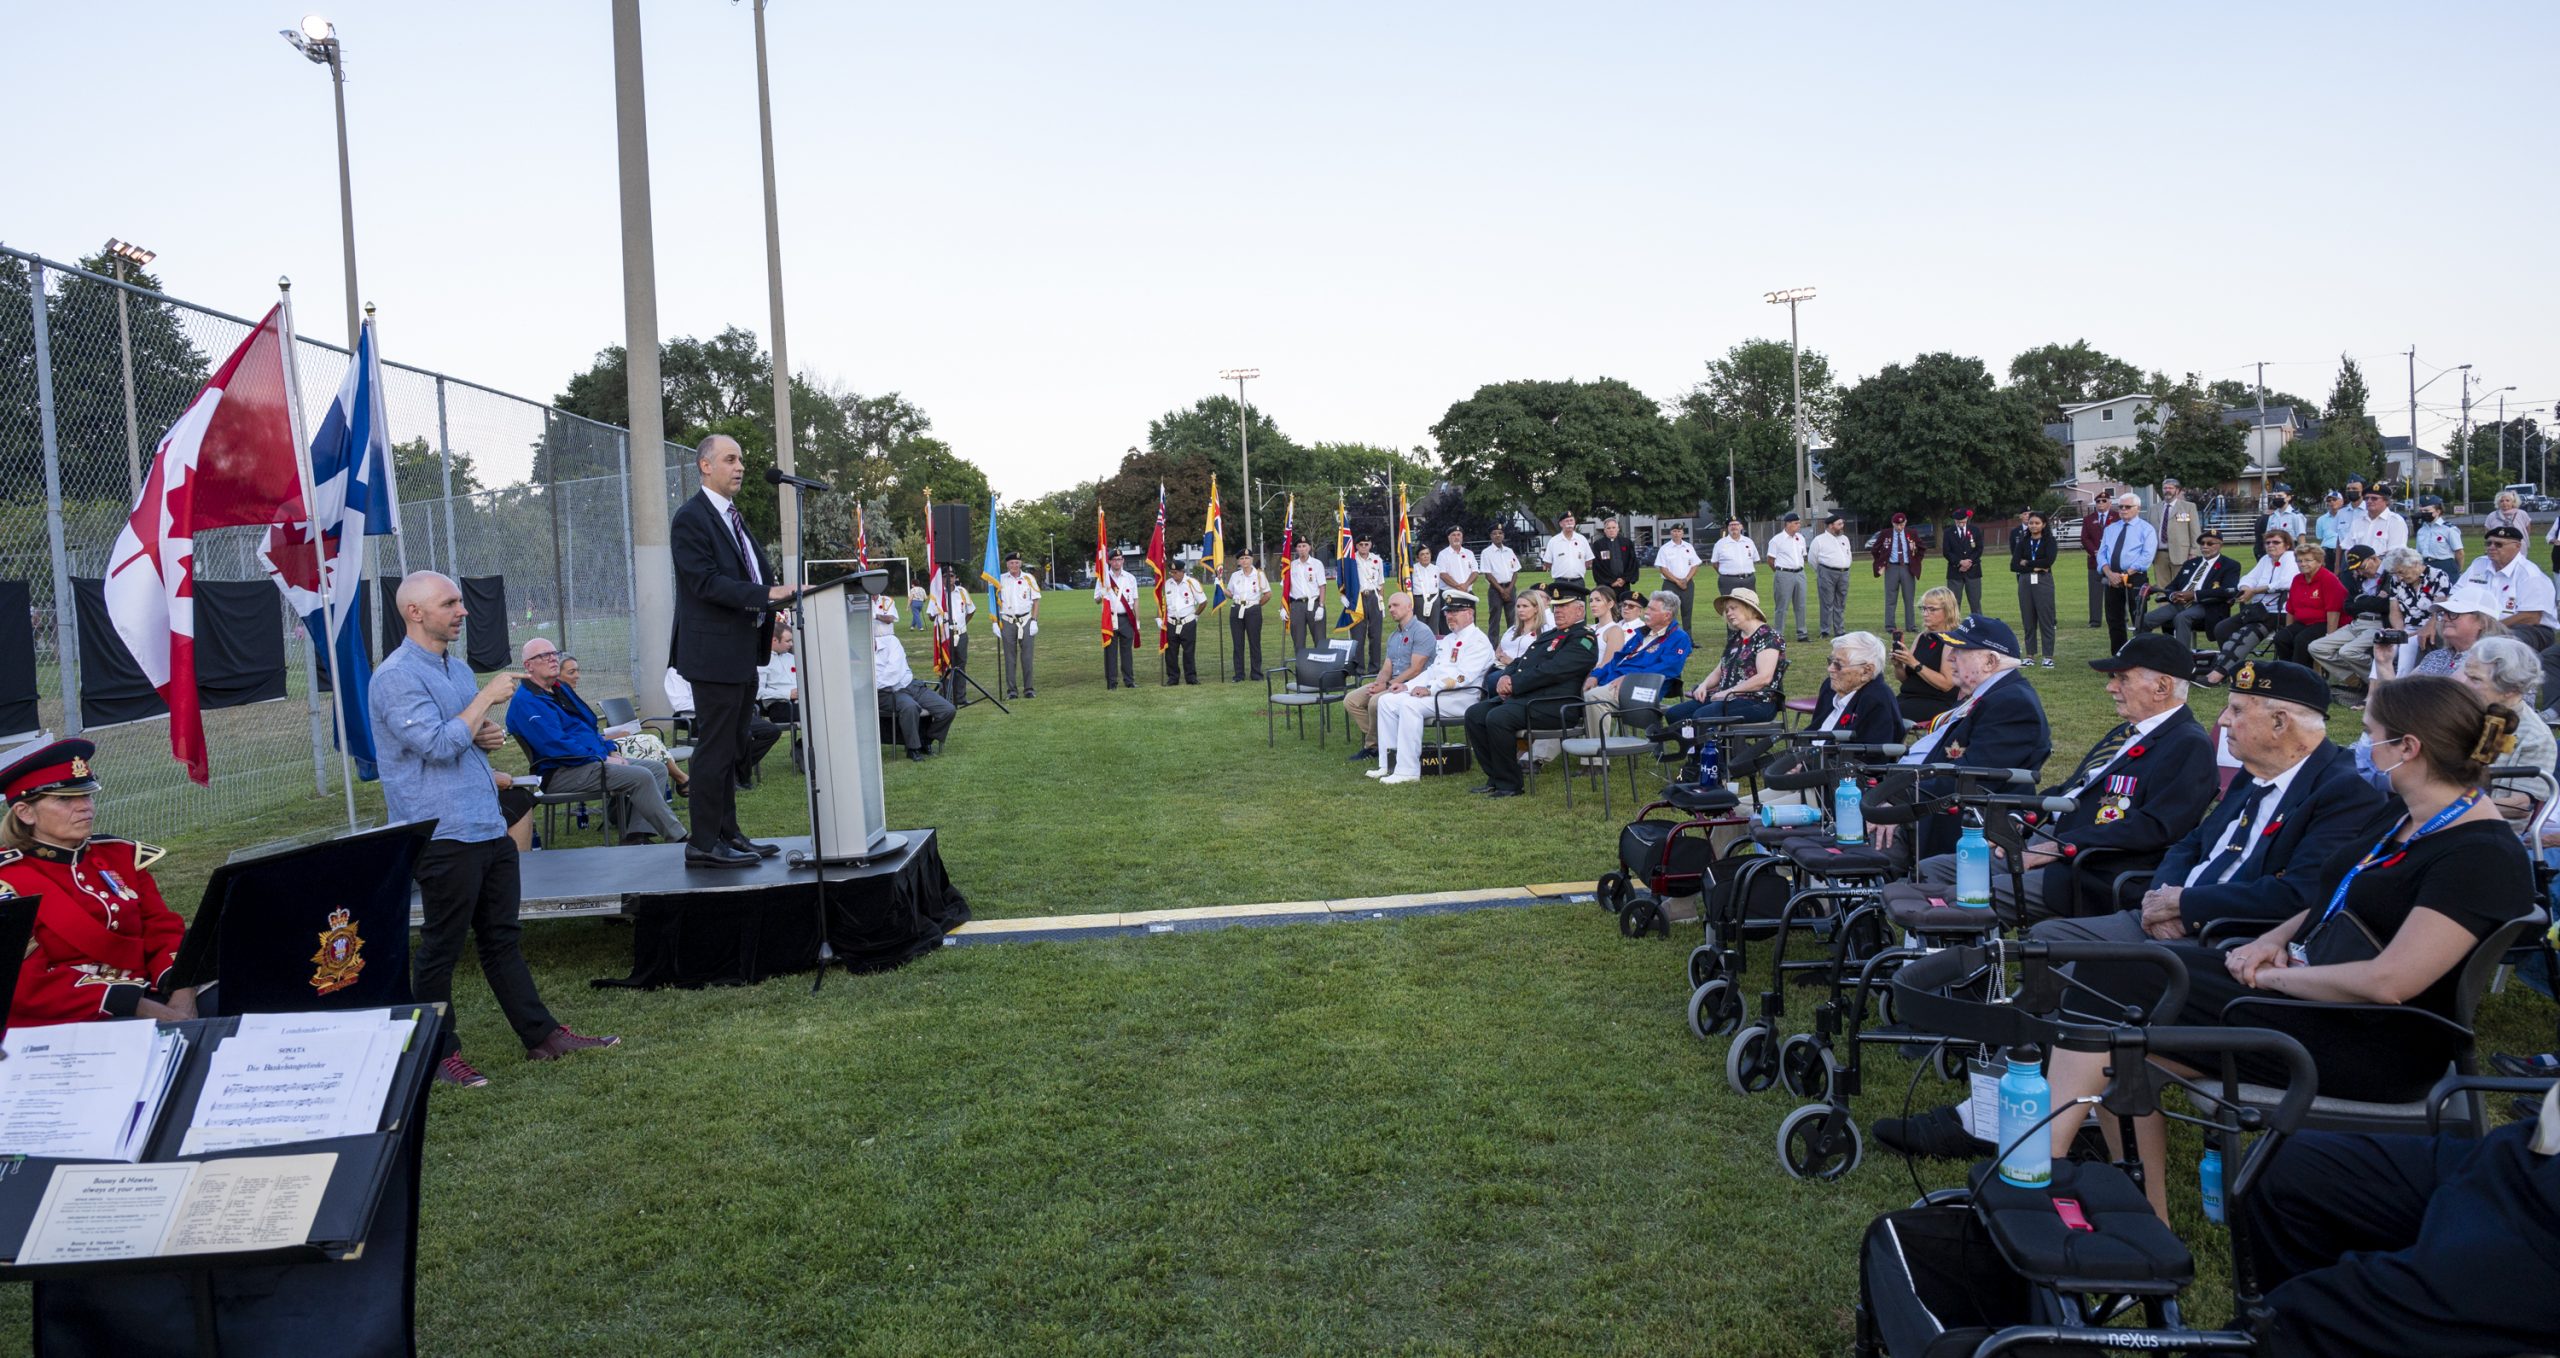 A crowd, including veterans, colour guards and guests, on the lawn of the Dieppe Park listening to the Deputy Mayor